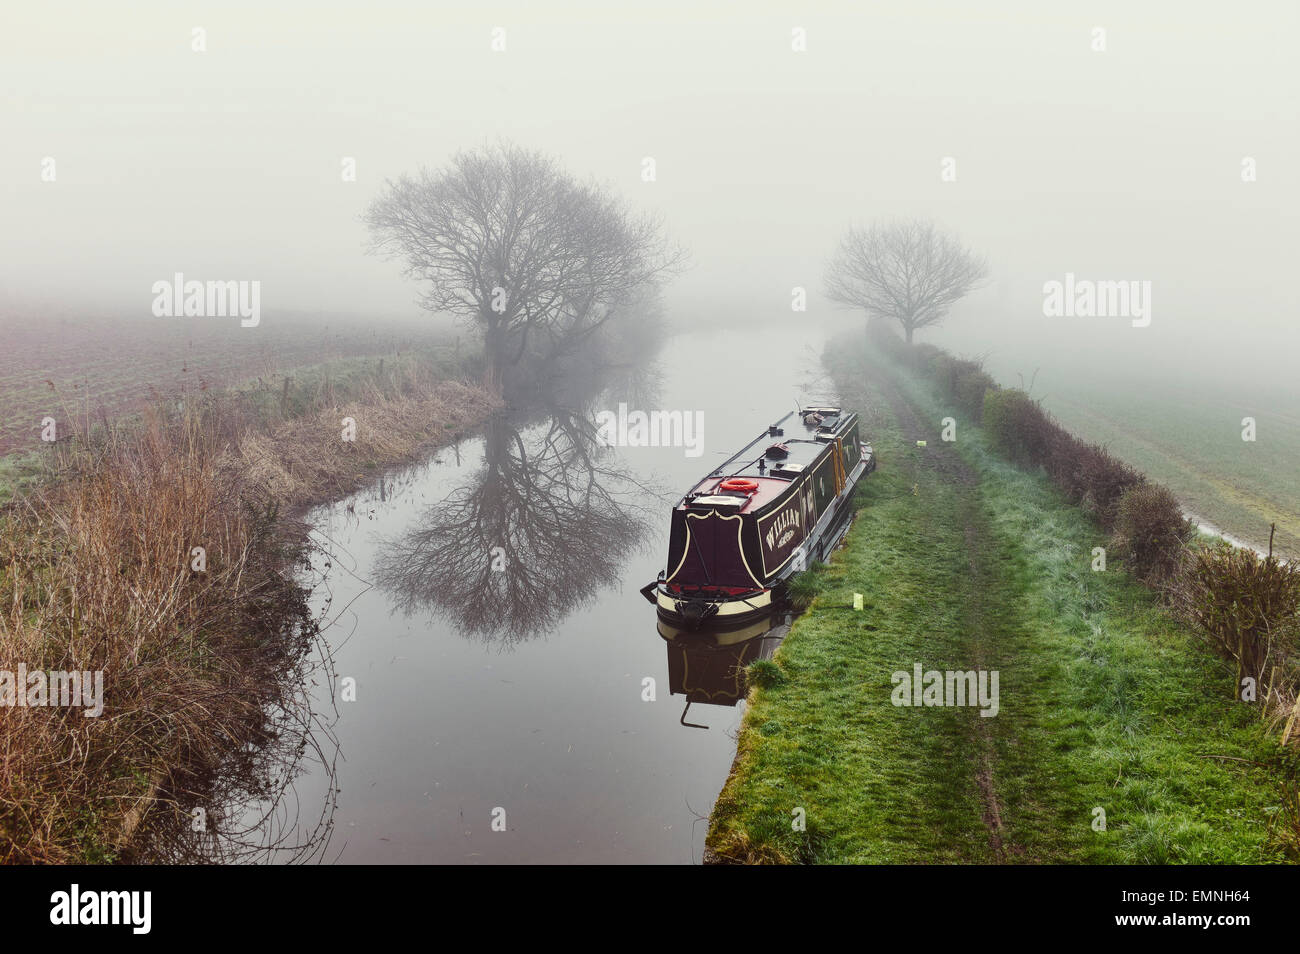 Narrowboat William moored on a misty morning on the Trent and Mersey Canal Stock Photo